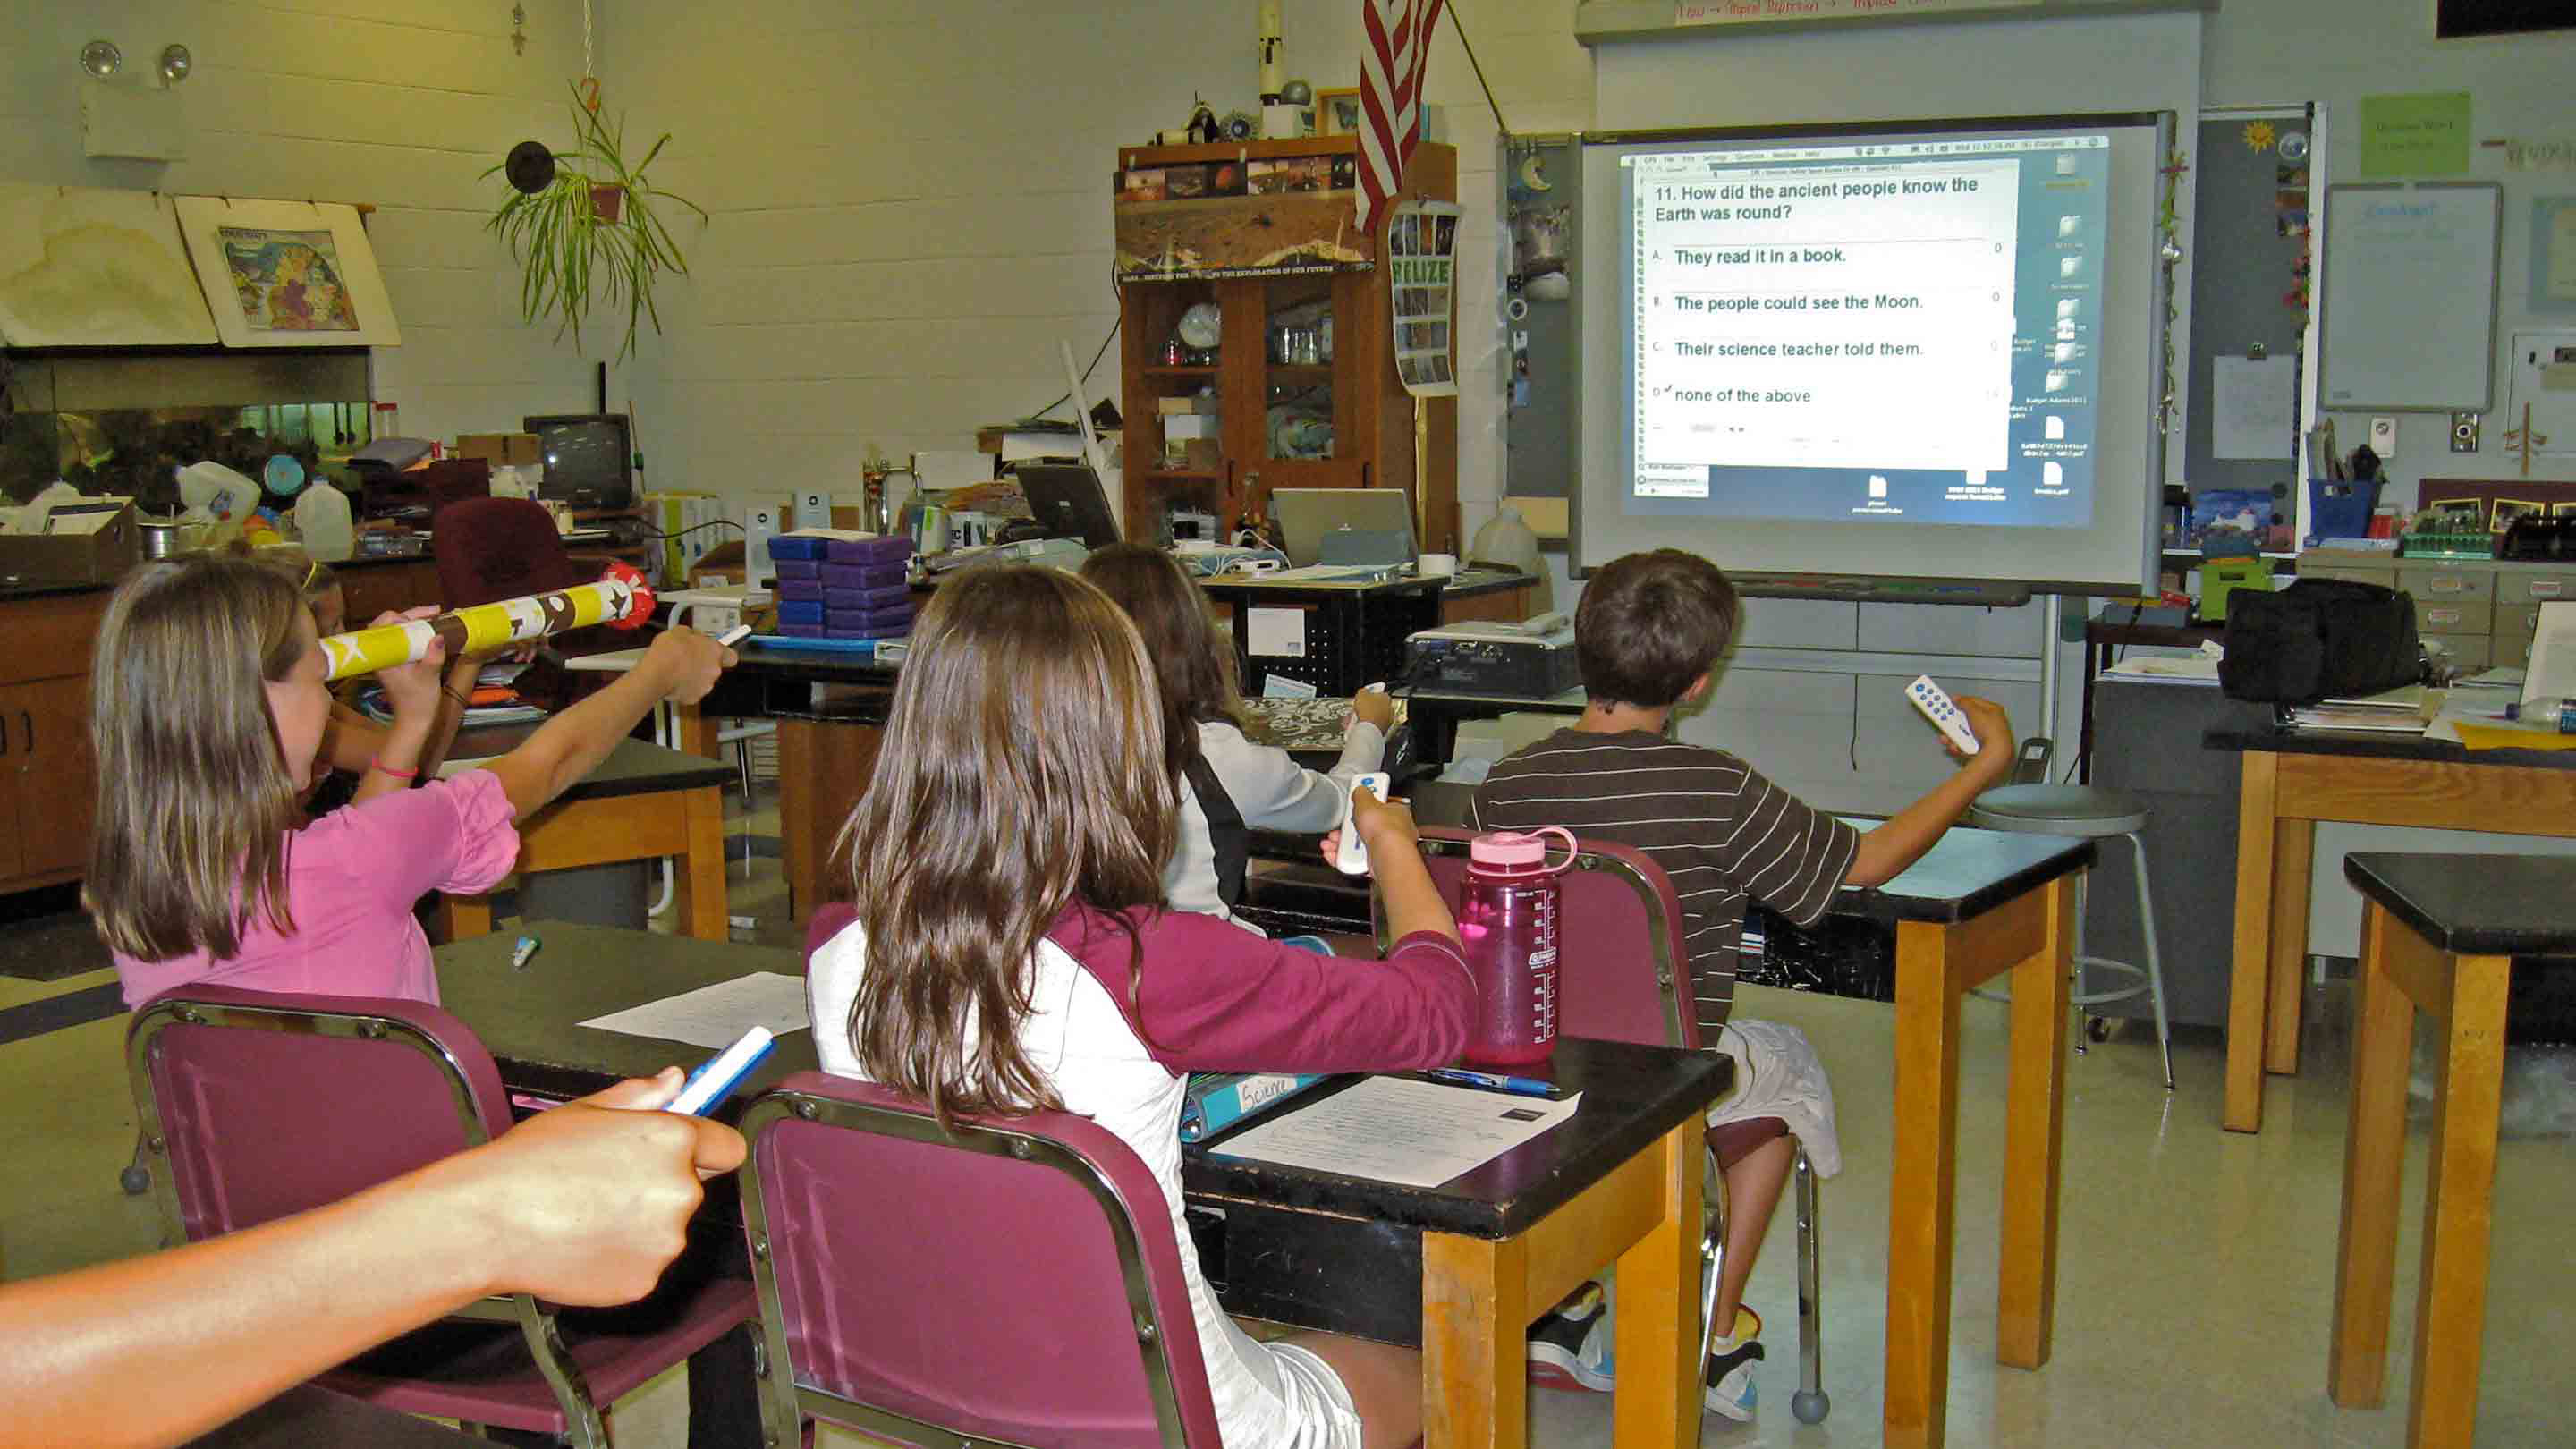 Effective Use of Clickers in the Classroom - Center for Teaching Excellence